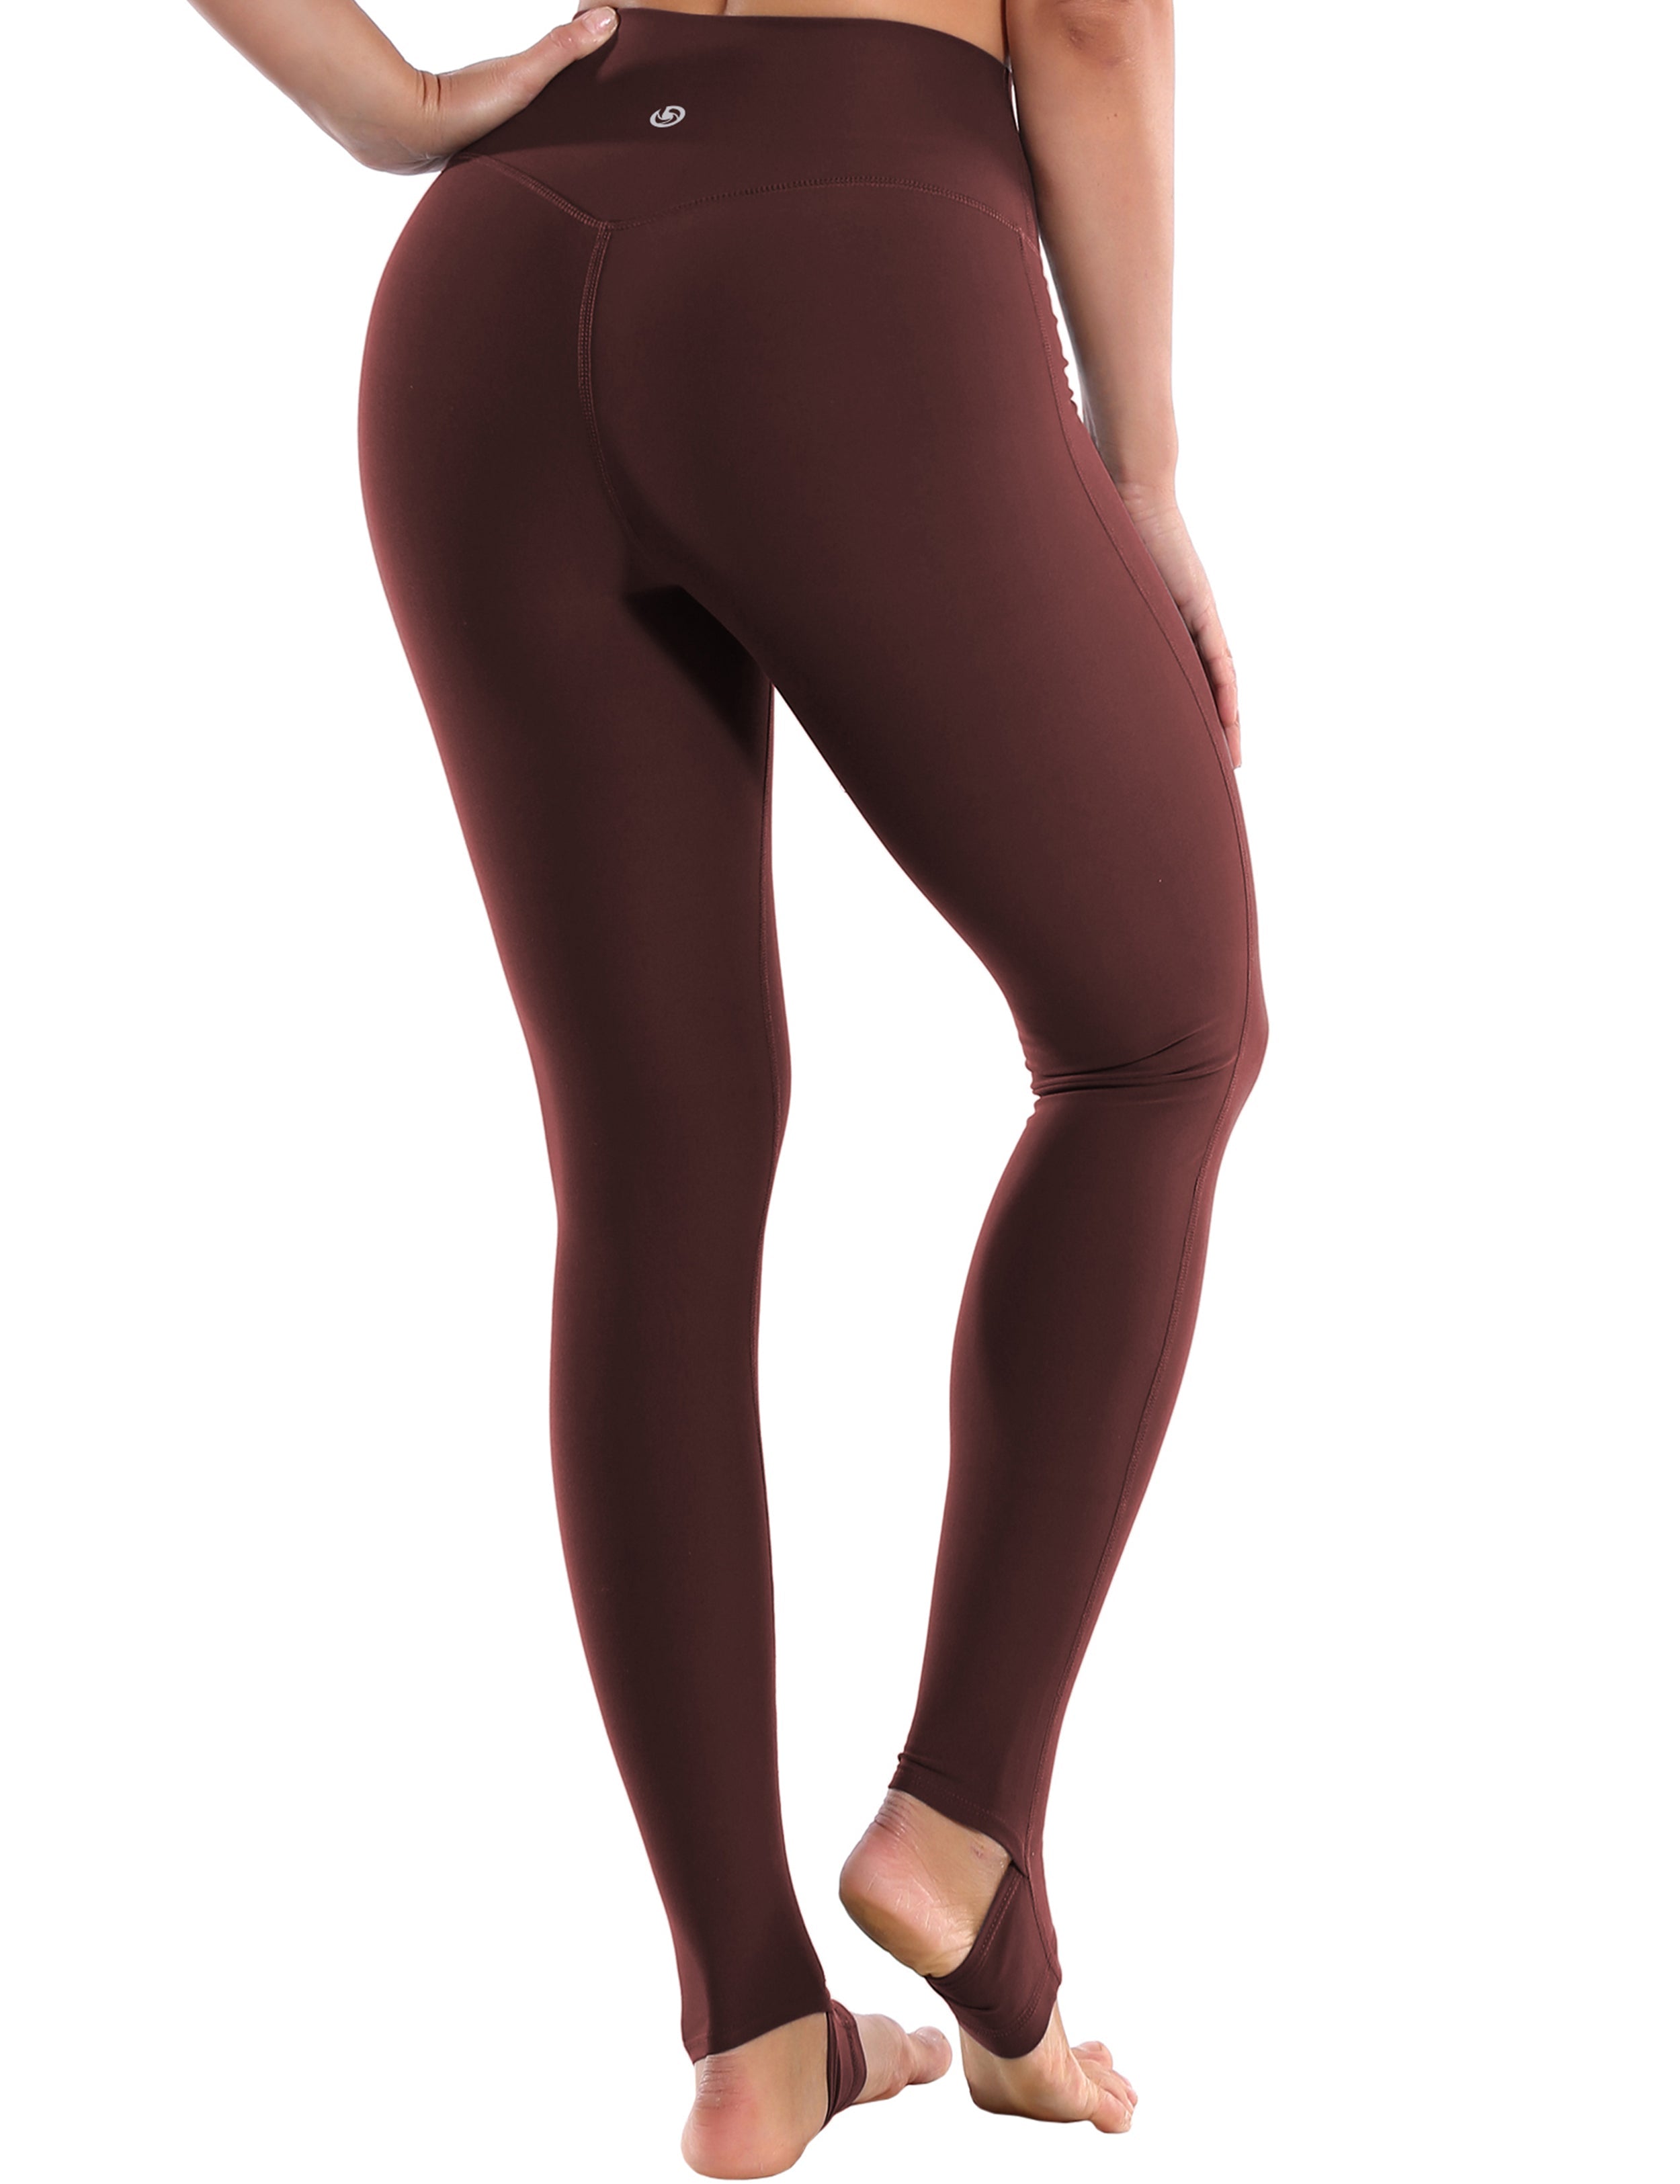 Over the Heel Golf Pants mahoganymaroon Over the Heel Design 87%Nylon/13%Spandex Fabric doesn't attract lint easily 4-way stretch No see-through Moisture-wicking Tummy control